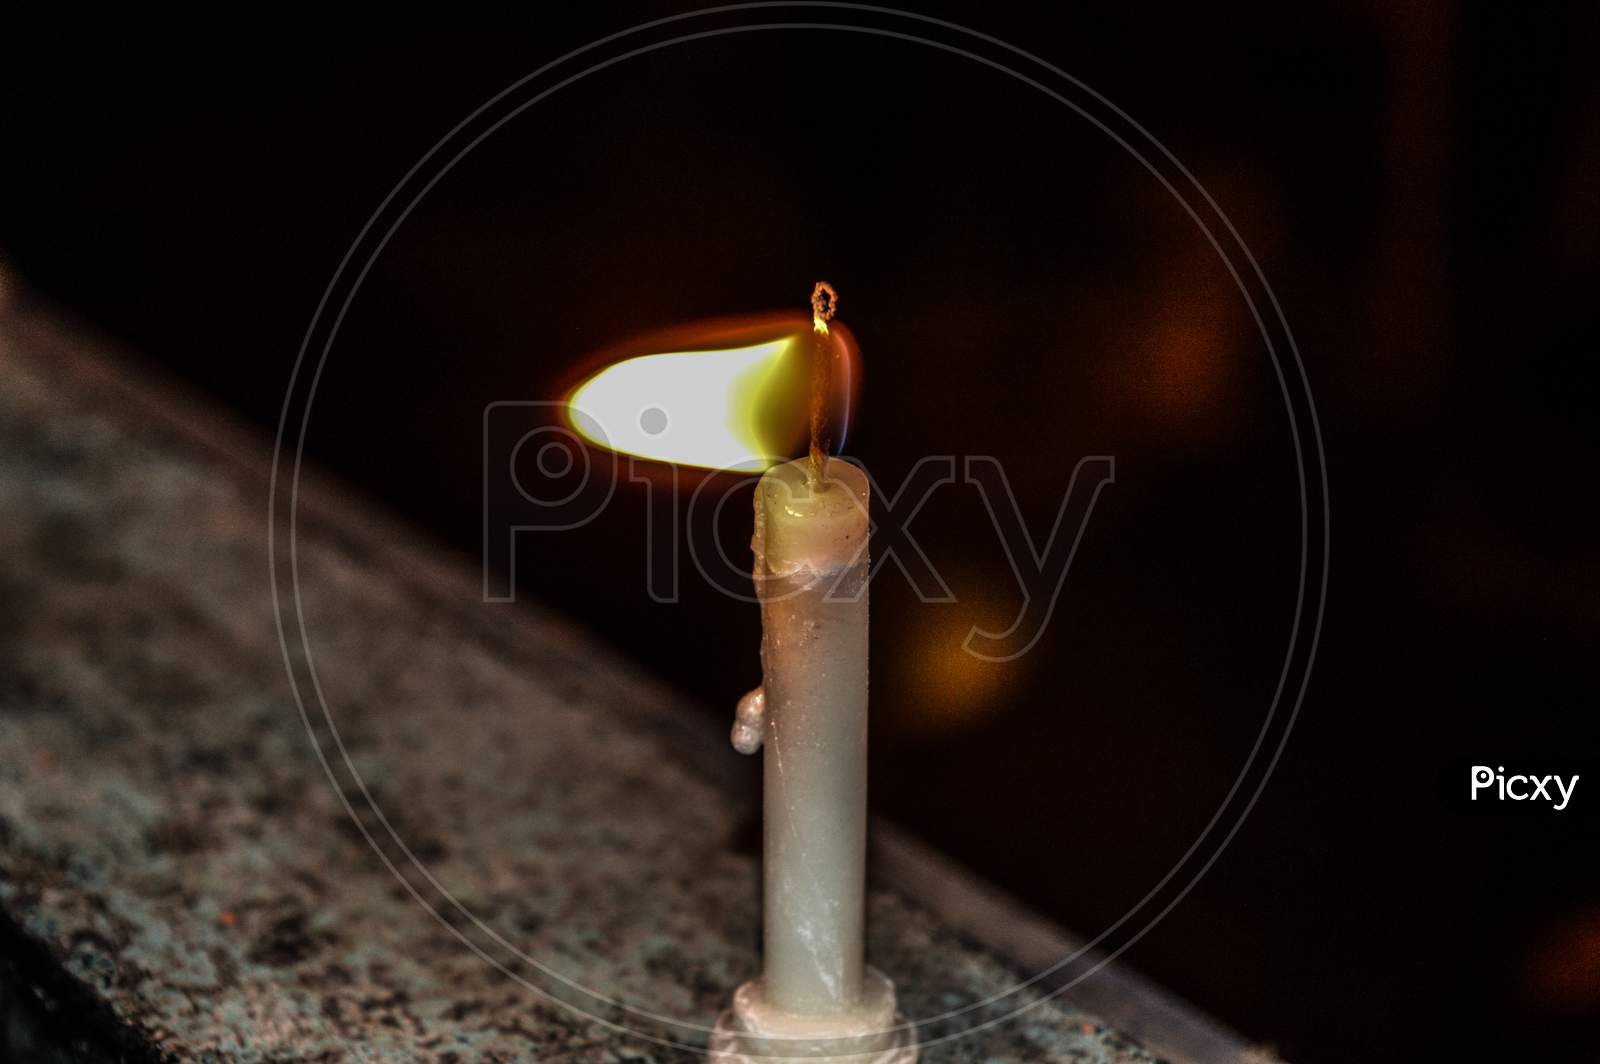 A Candle On Indian Festival Diwali Deepawali With Fire Isolated On Table